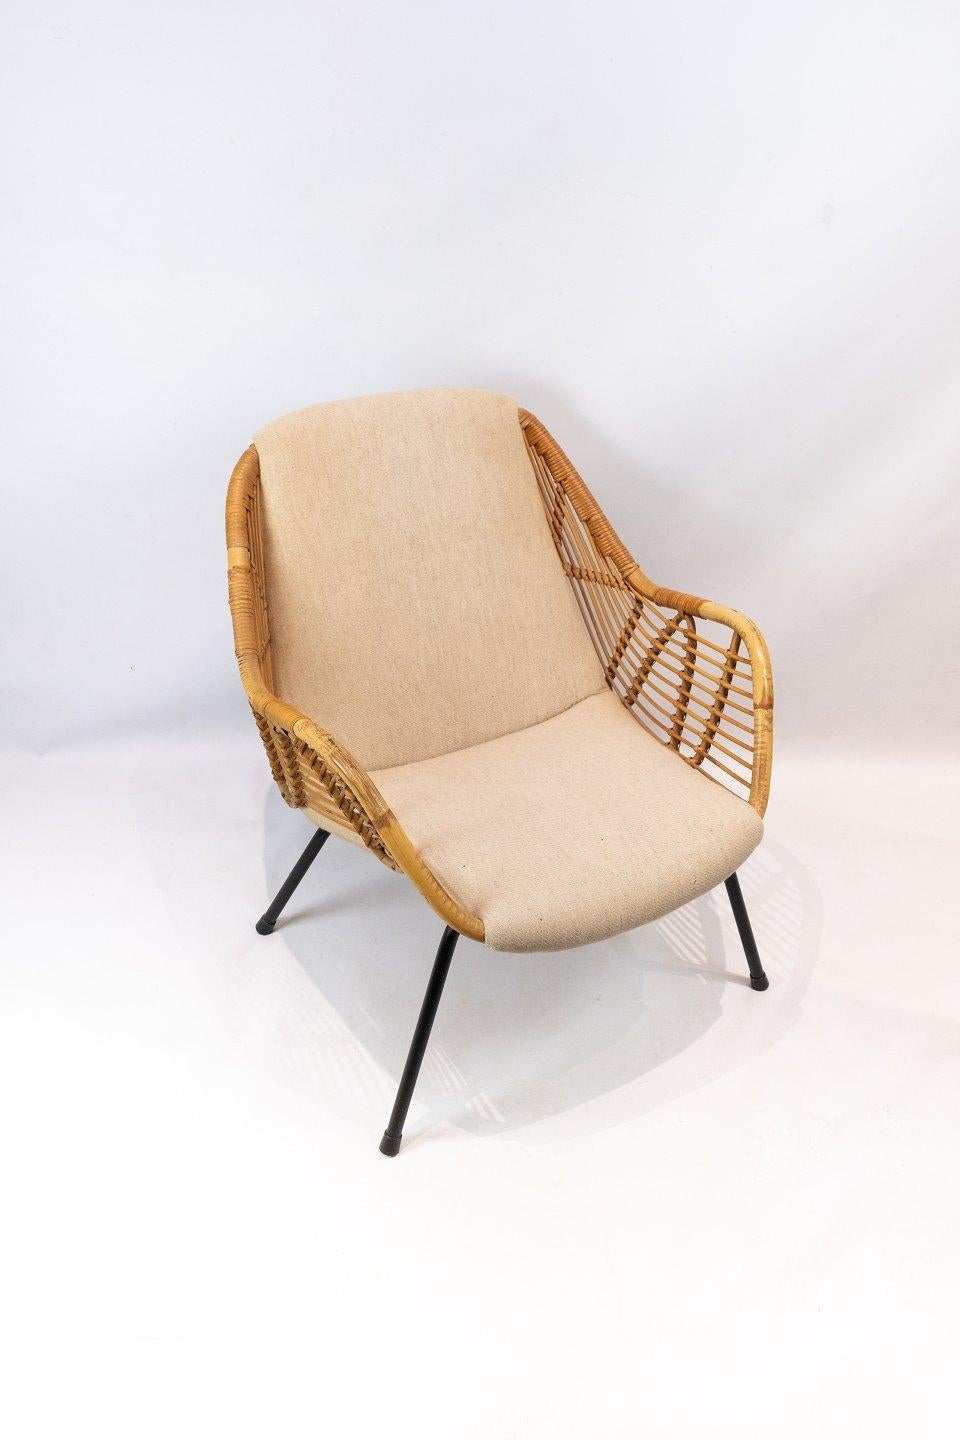 Armchair upholstered with light fabric in wood and frame in metal of Danish design from the 1950s. The chair is in great vintage condition.
  